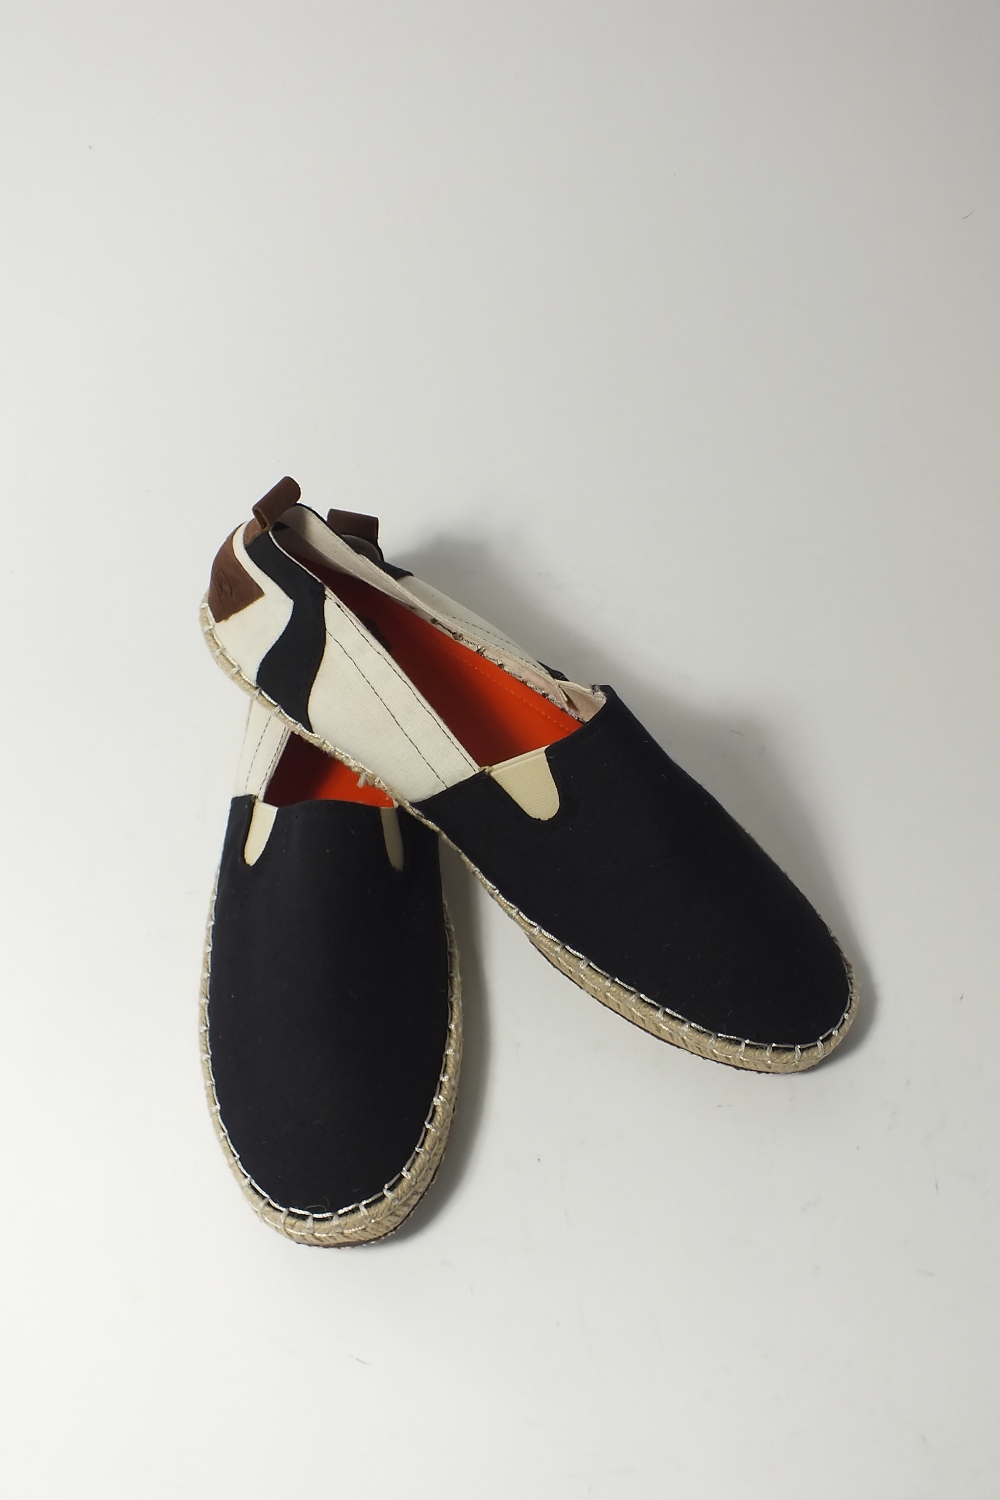 A pair of Bellfield espadrilles, black, cream and brown canvas, UK 9 - Image 5 of 7